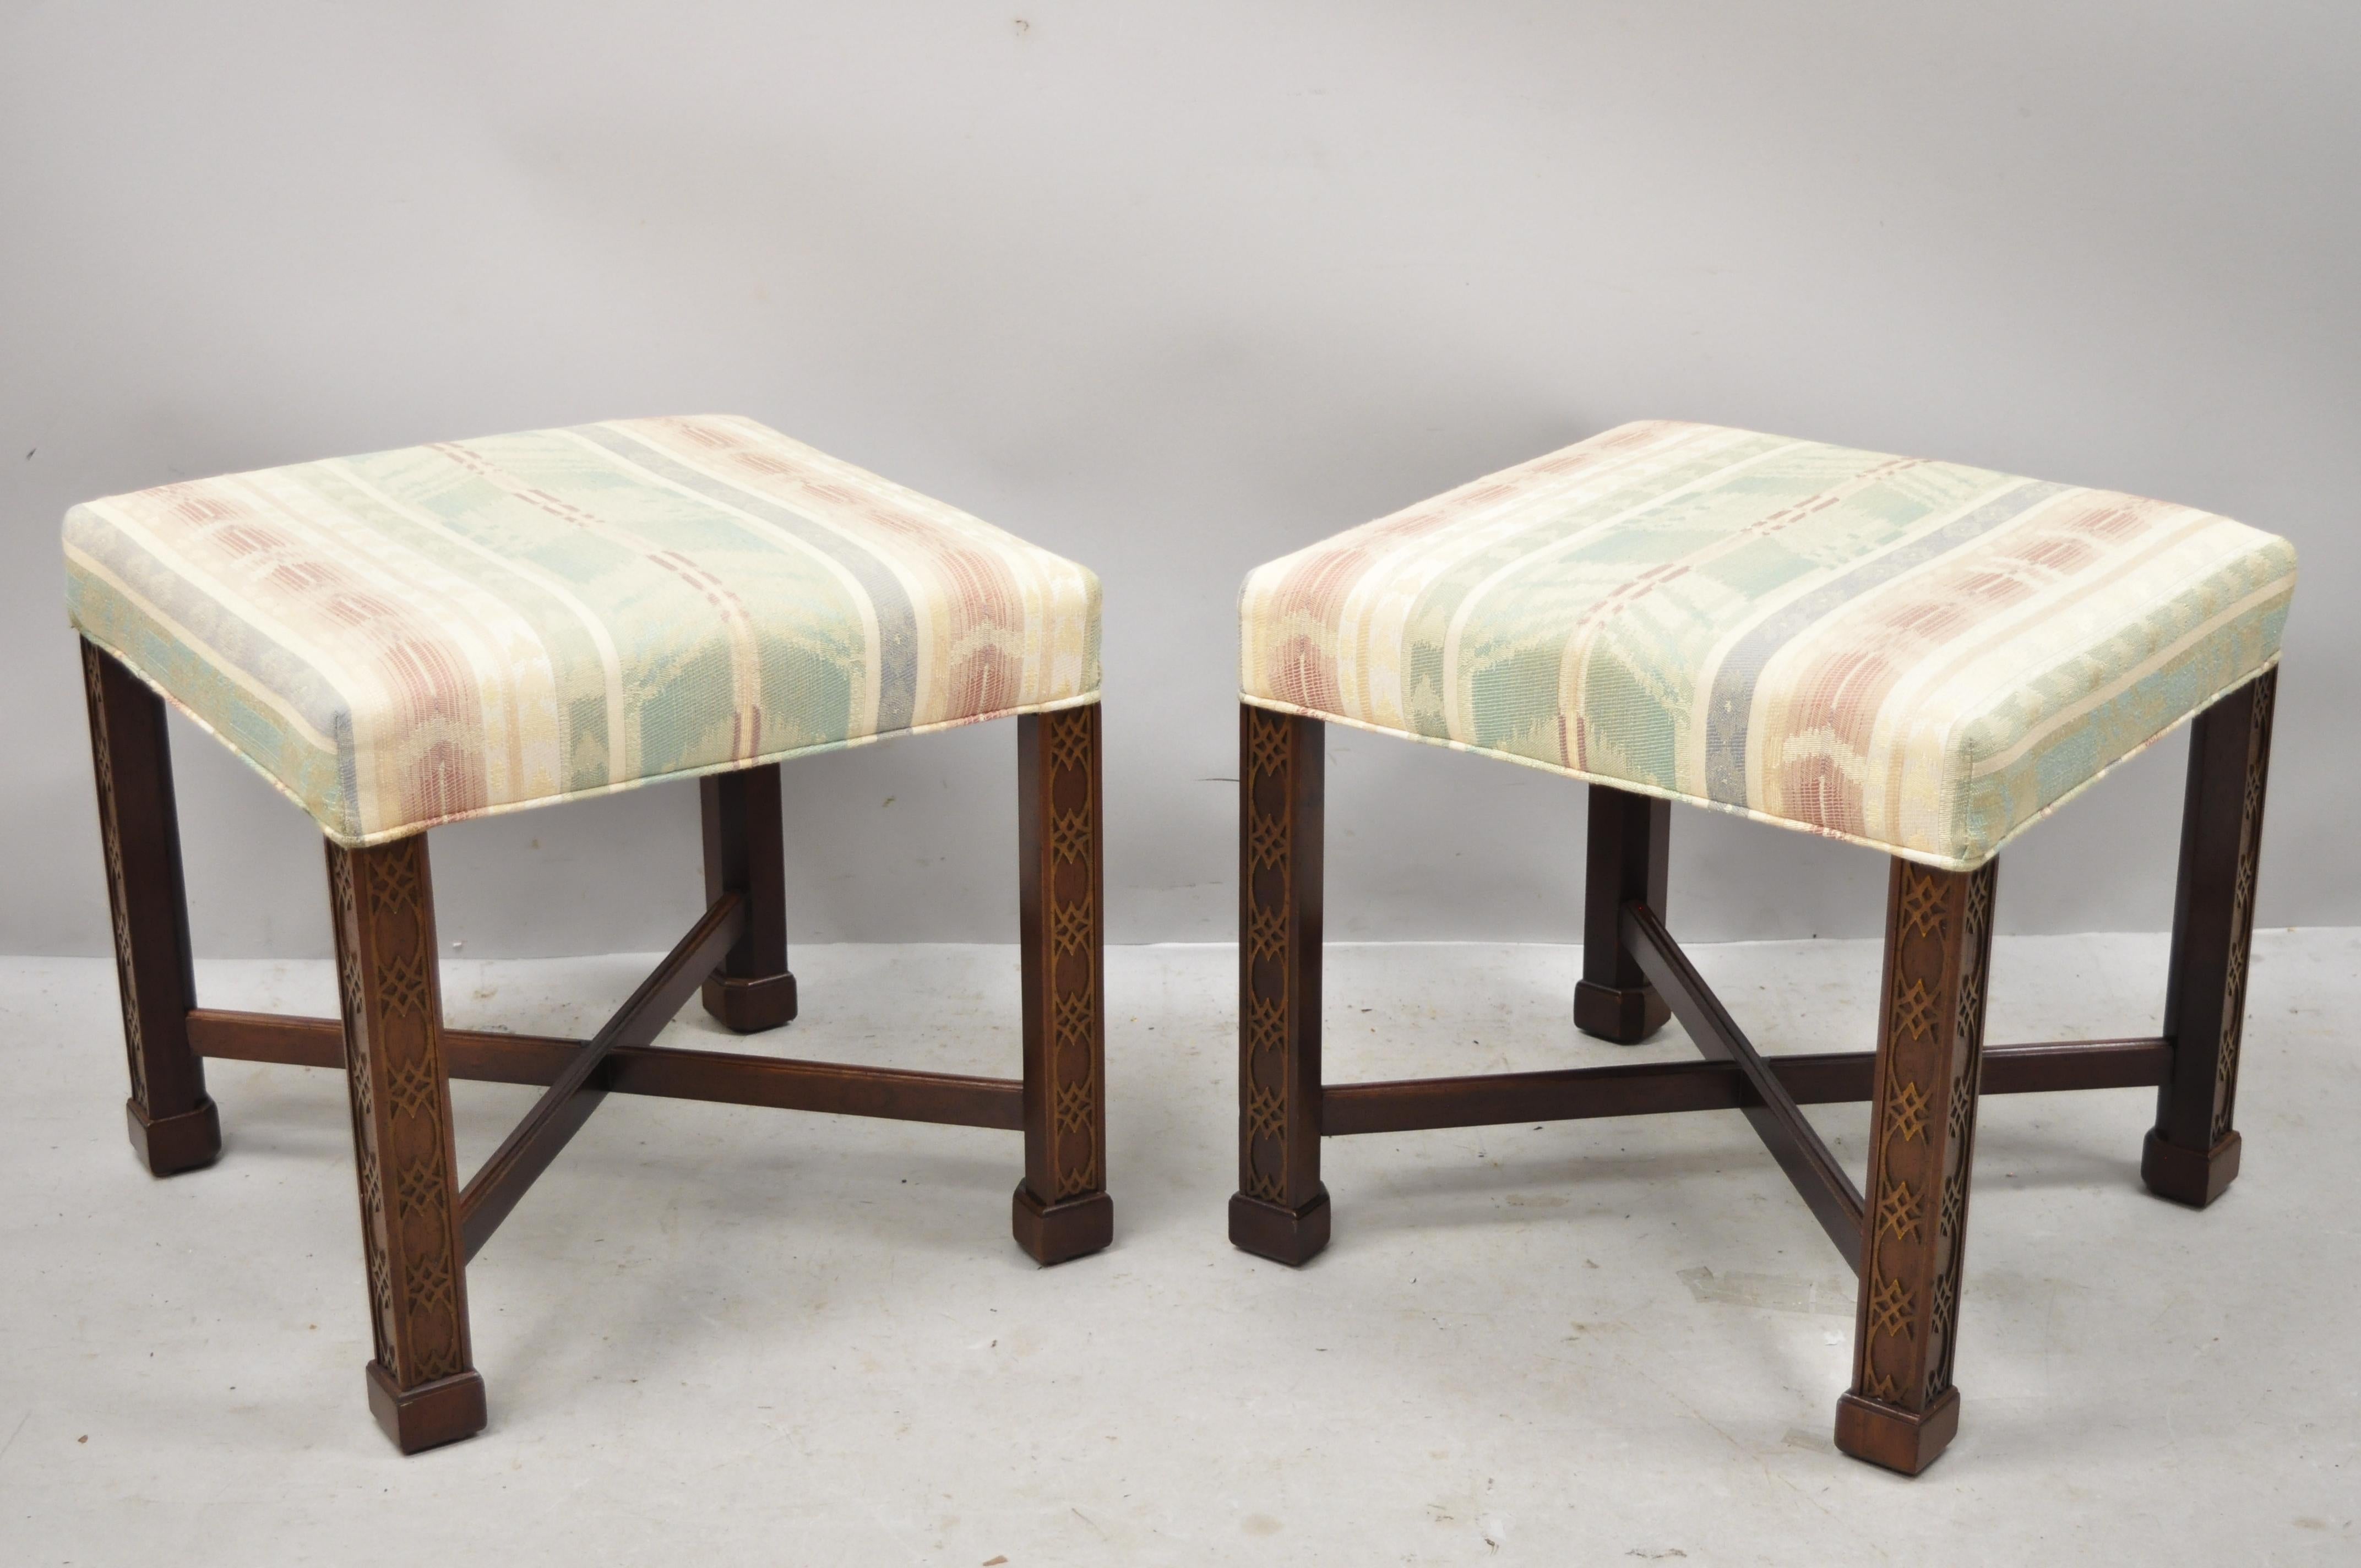 20th century Ethan Allen Chinese Chippendale style mahogany fretwork square stool - a pair. Item features a solid wood frame, upholstered seat, nicely carved details, quality American craftsmanship, great style and form, circa late 20th century.